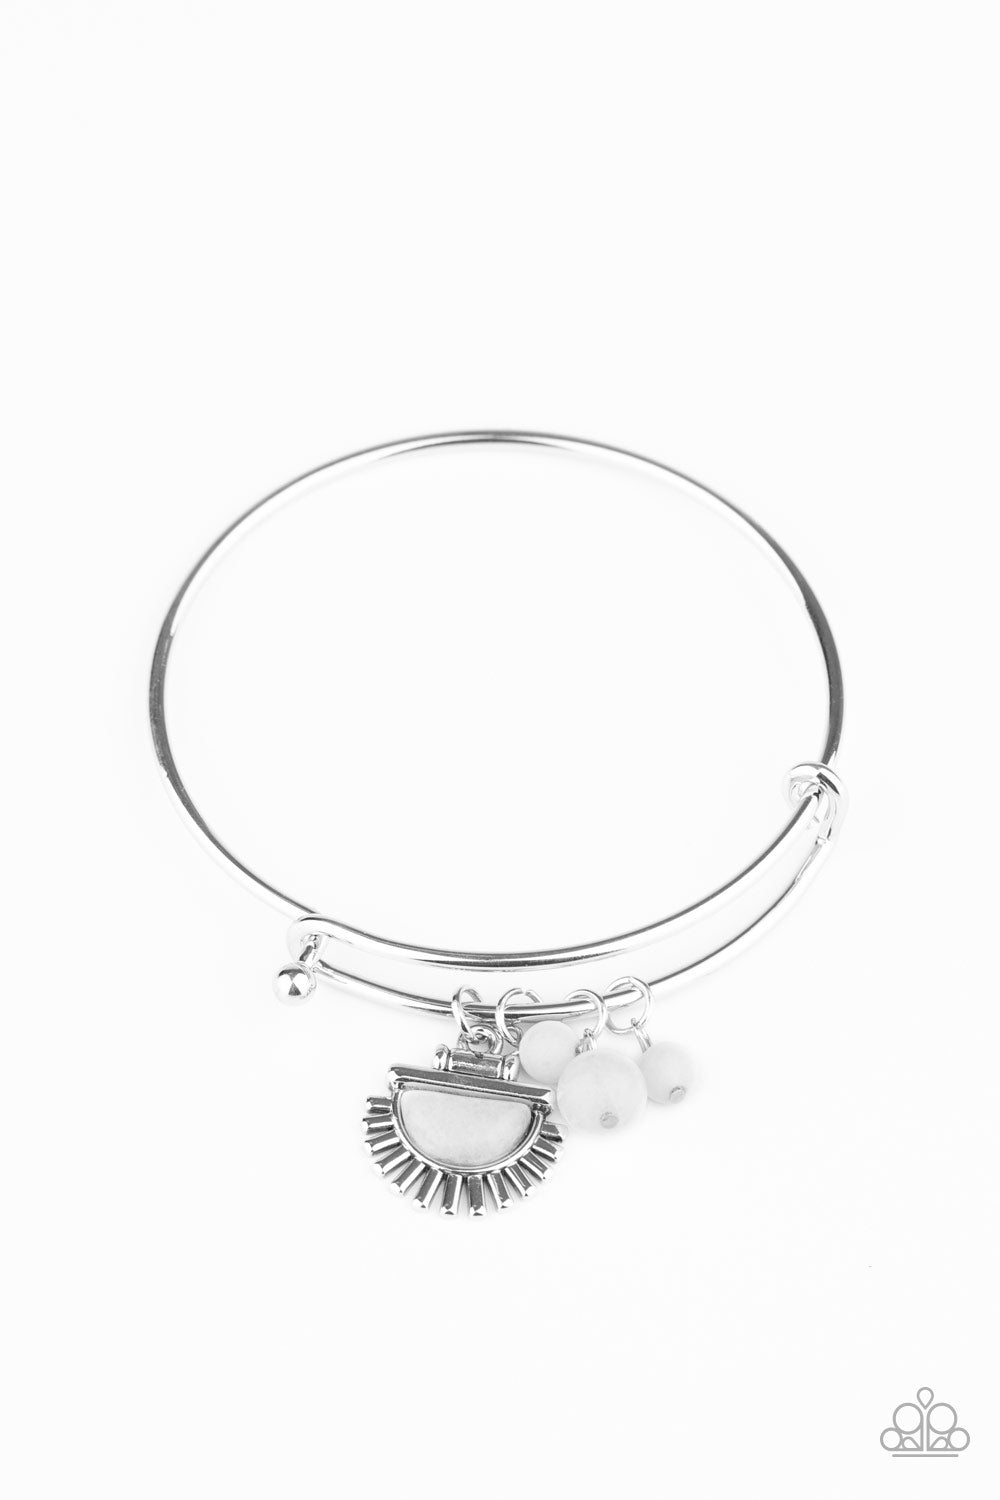 Mind, Body, and SOL White Bracelet - Paparazzi Accessories